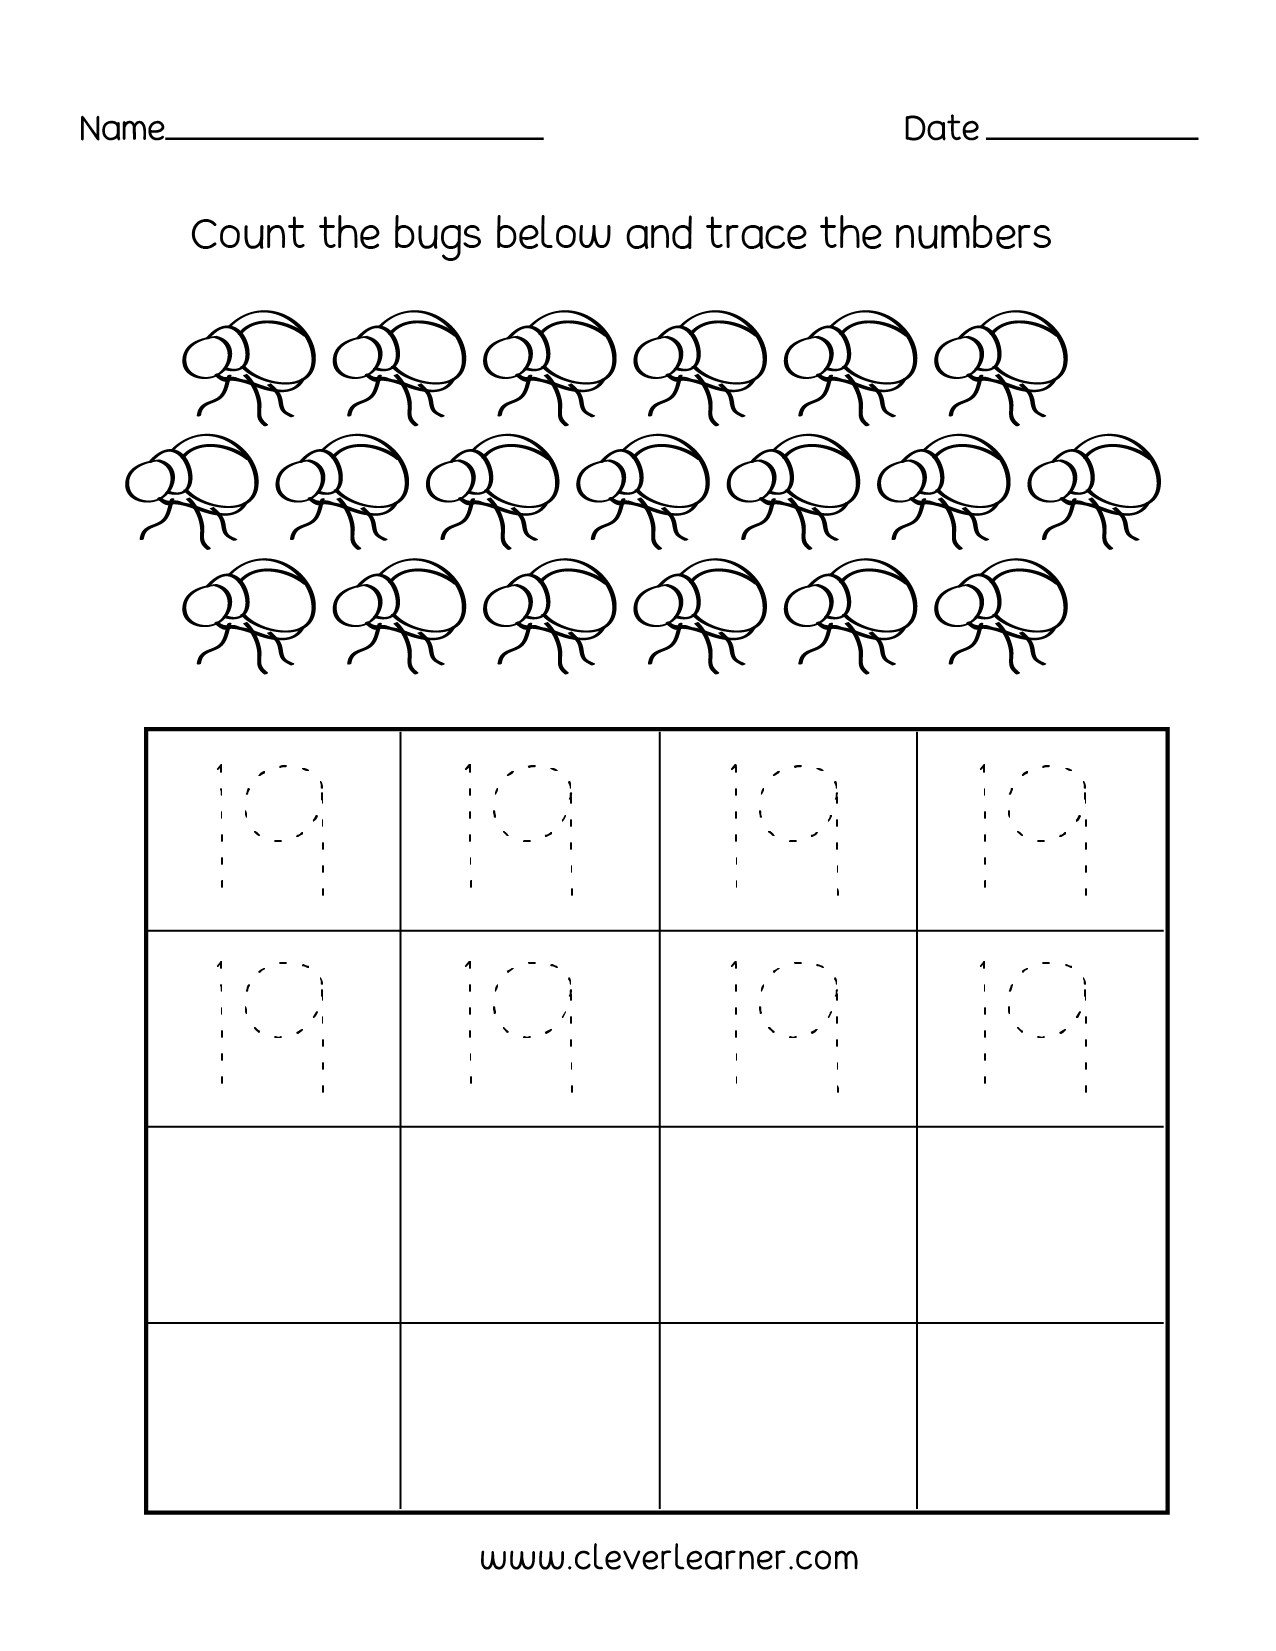 number-19-writing-counting-and-identification-printable-worksheets-for